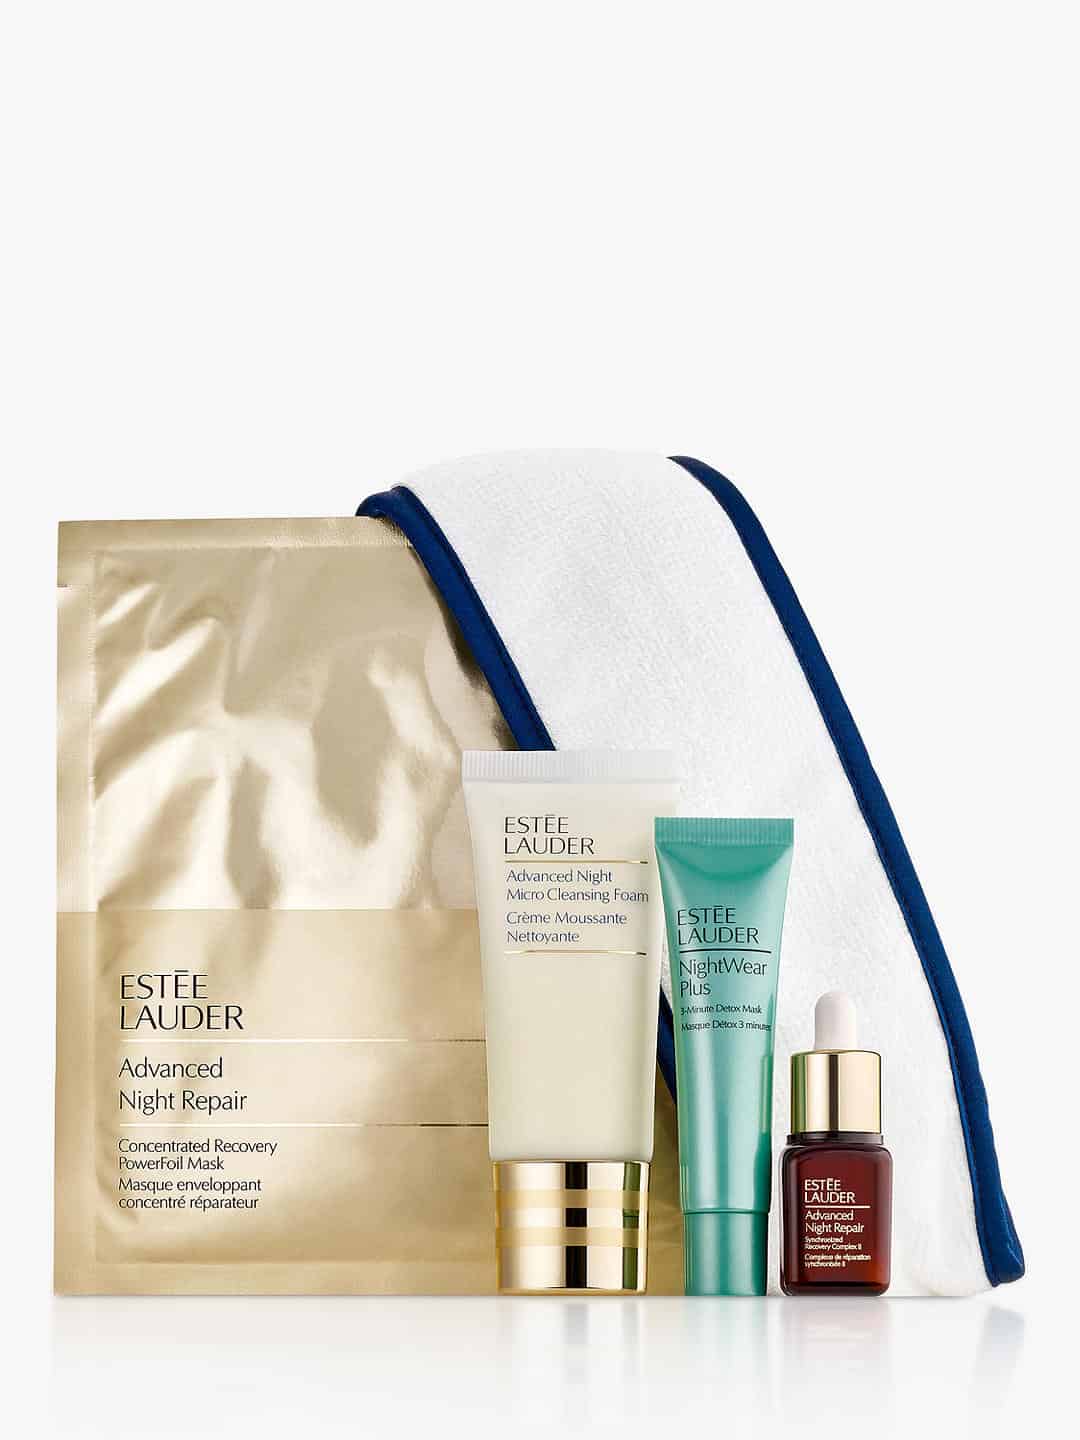 Skincare Travel Sets - Glow on the Go with these Travel Skincare Sets - Find the best skincare travel kit for your skin type! Both high end and drugstore! Skincare tips, Skincare products for all. #skincare #beauty #makeup #traveltips #longhaul #shorthaul #packingtip #oily #normal #combination #dry #sensitive #acne